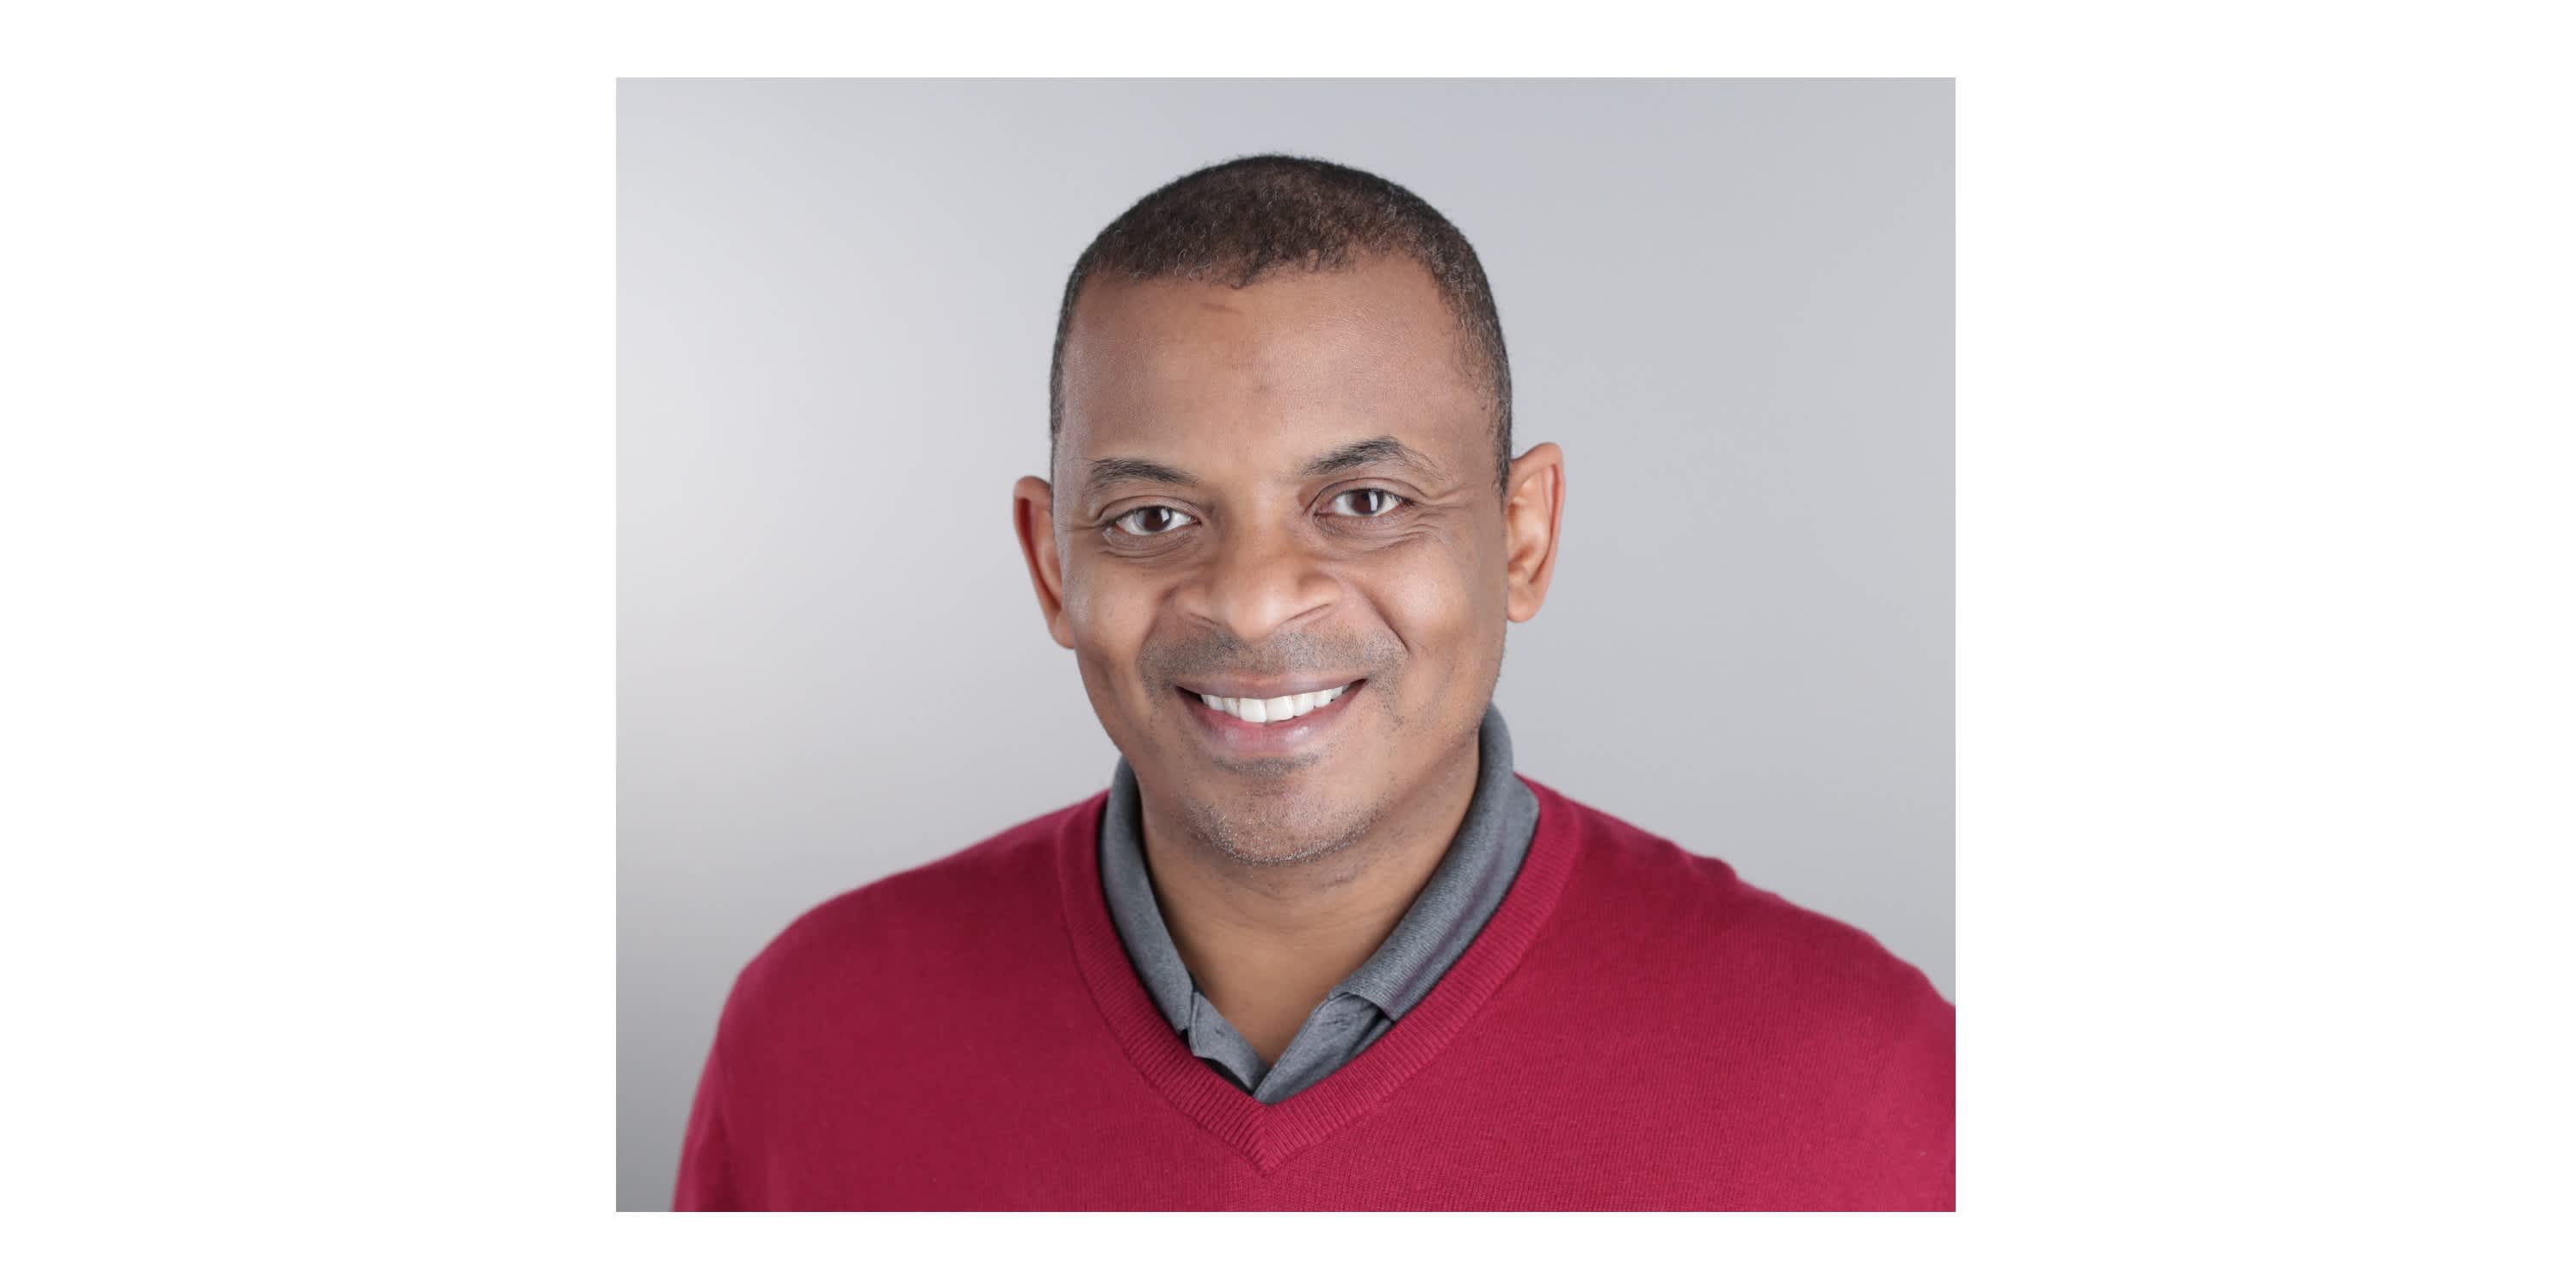 Anthony Foxx, Chief Policy Officer and Senior Advisor to the President and CEO at Lyft